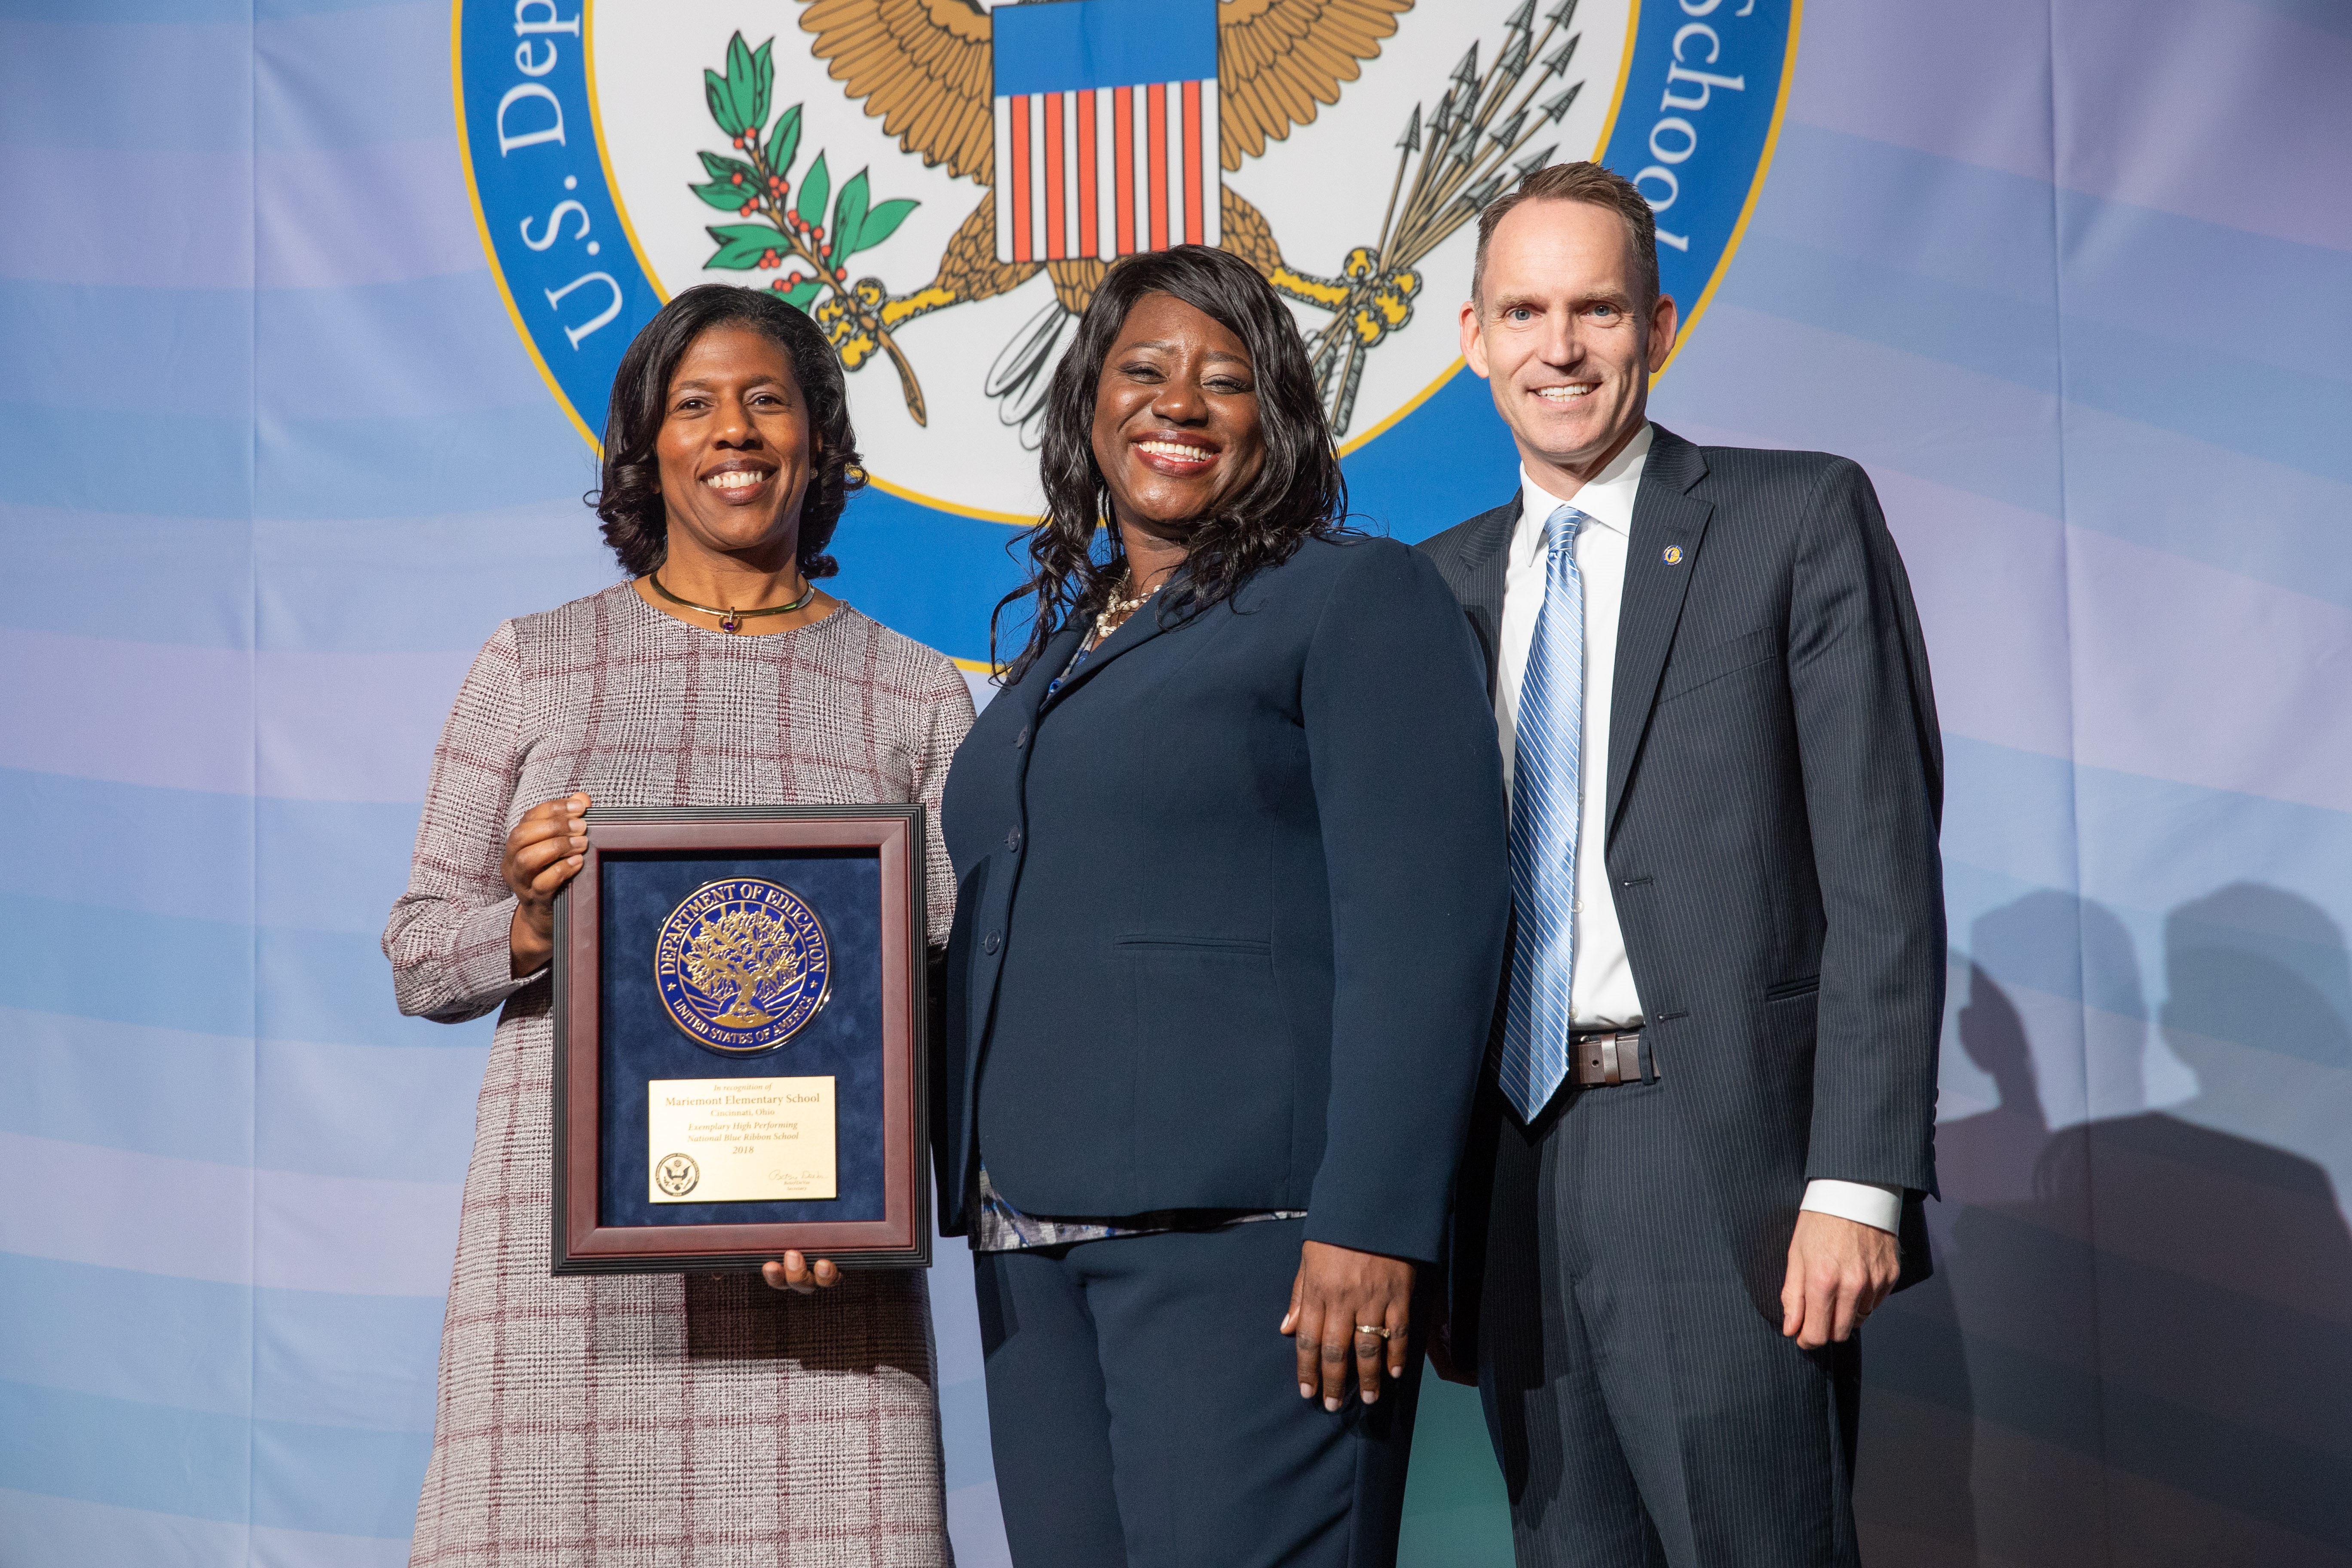 Ericka Simmons and Steve Estepp at National Blue Ribbon Ceremony in 2018